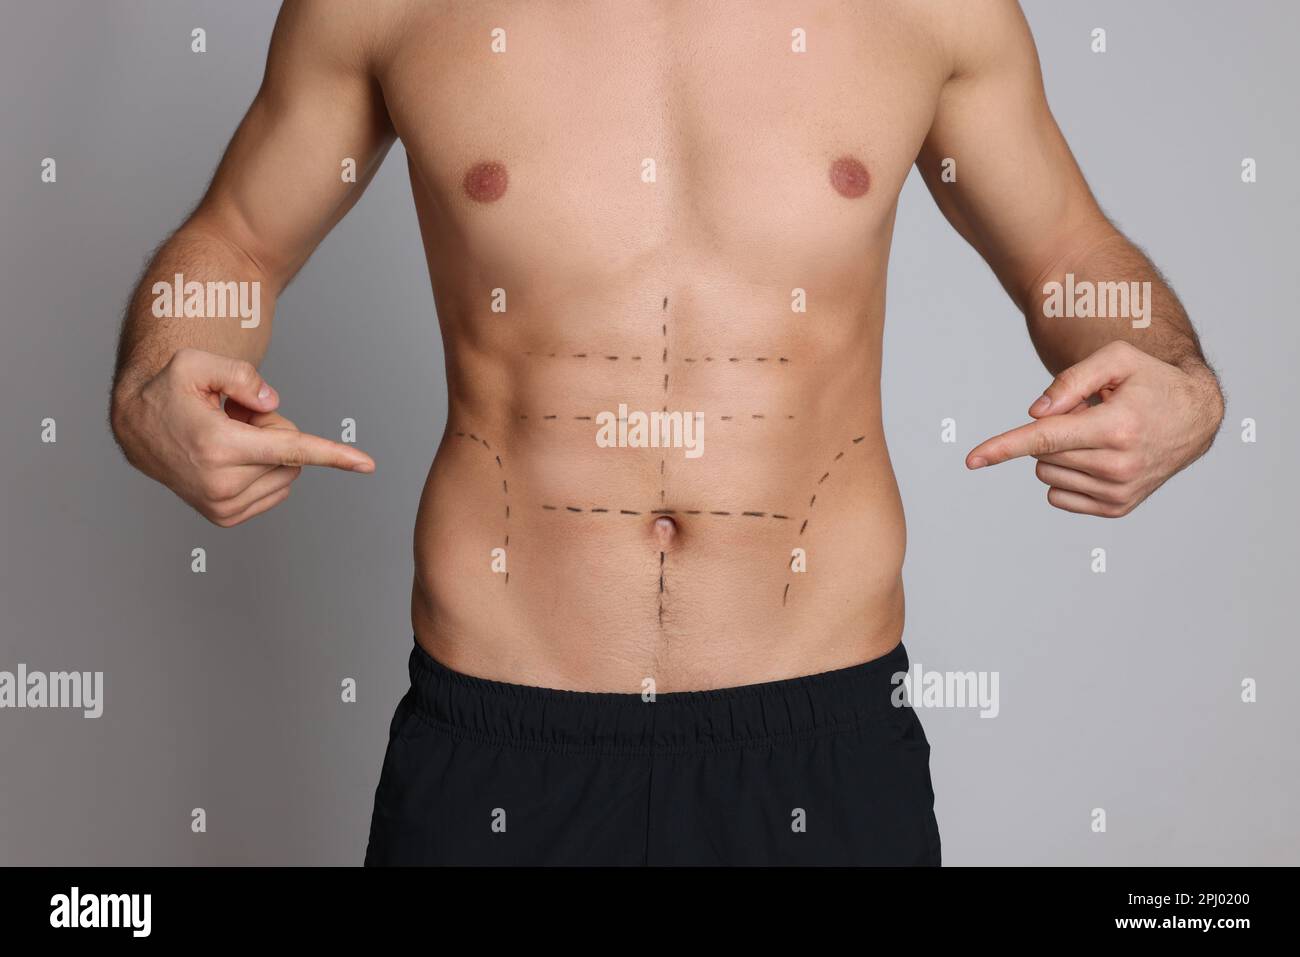 Fit man with marks on body against grey background, closeup. Weight loss surgery Stock Photo